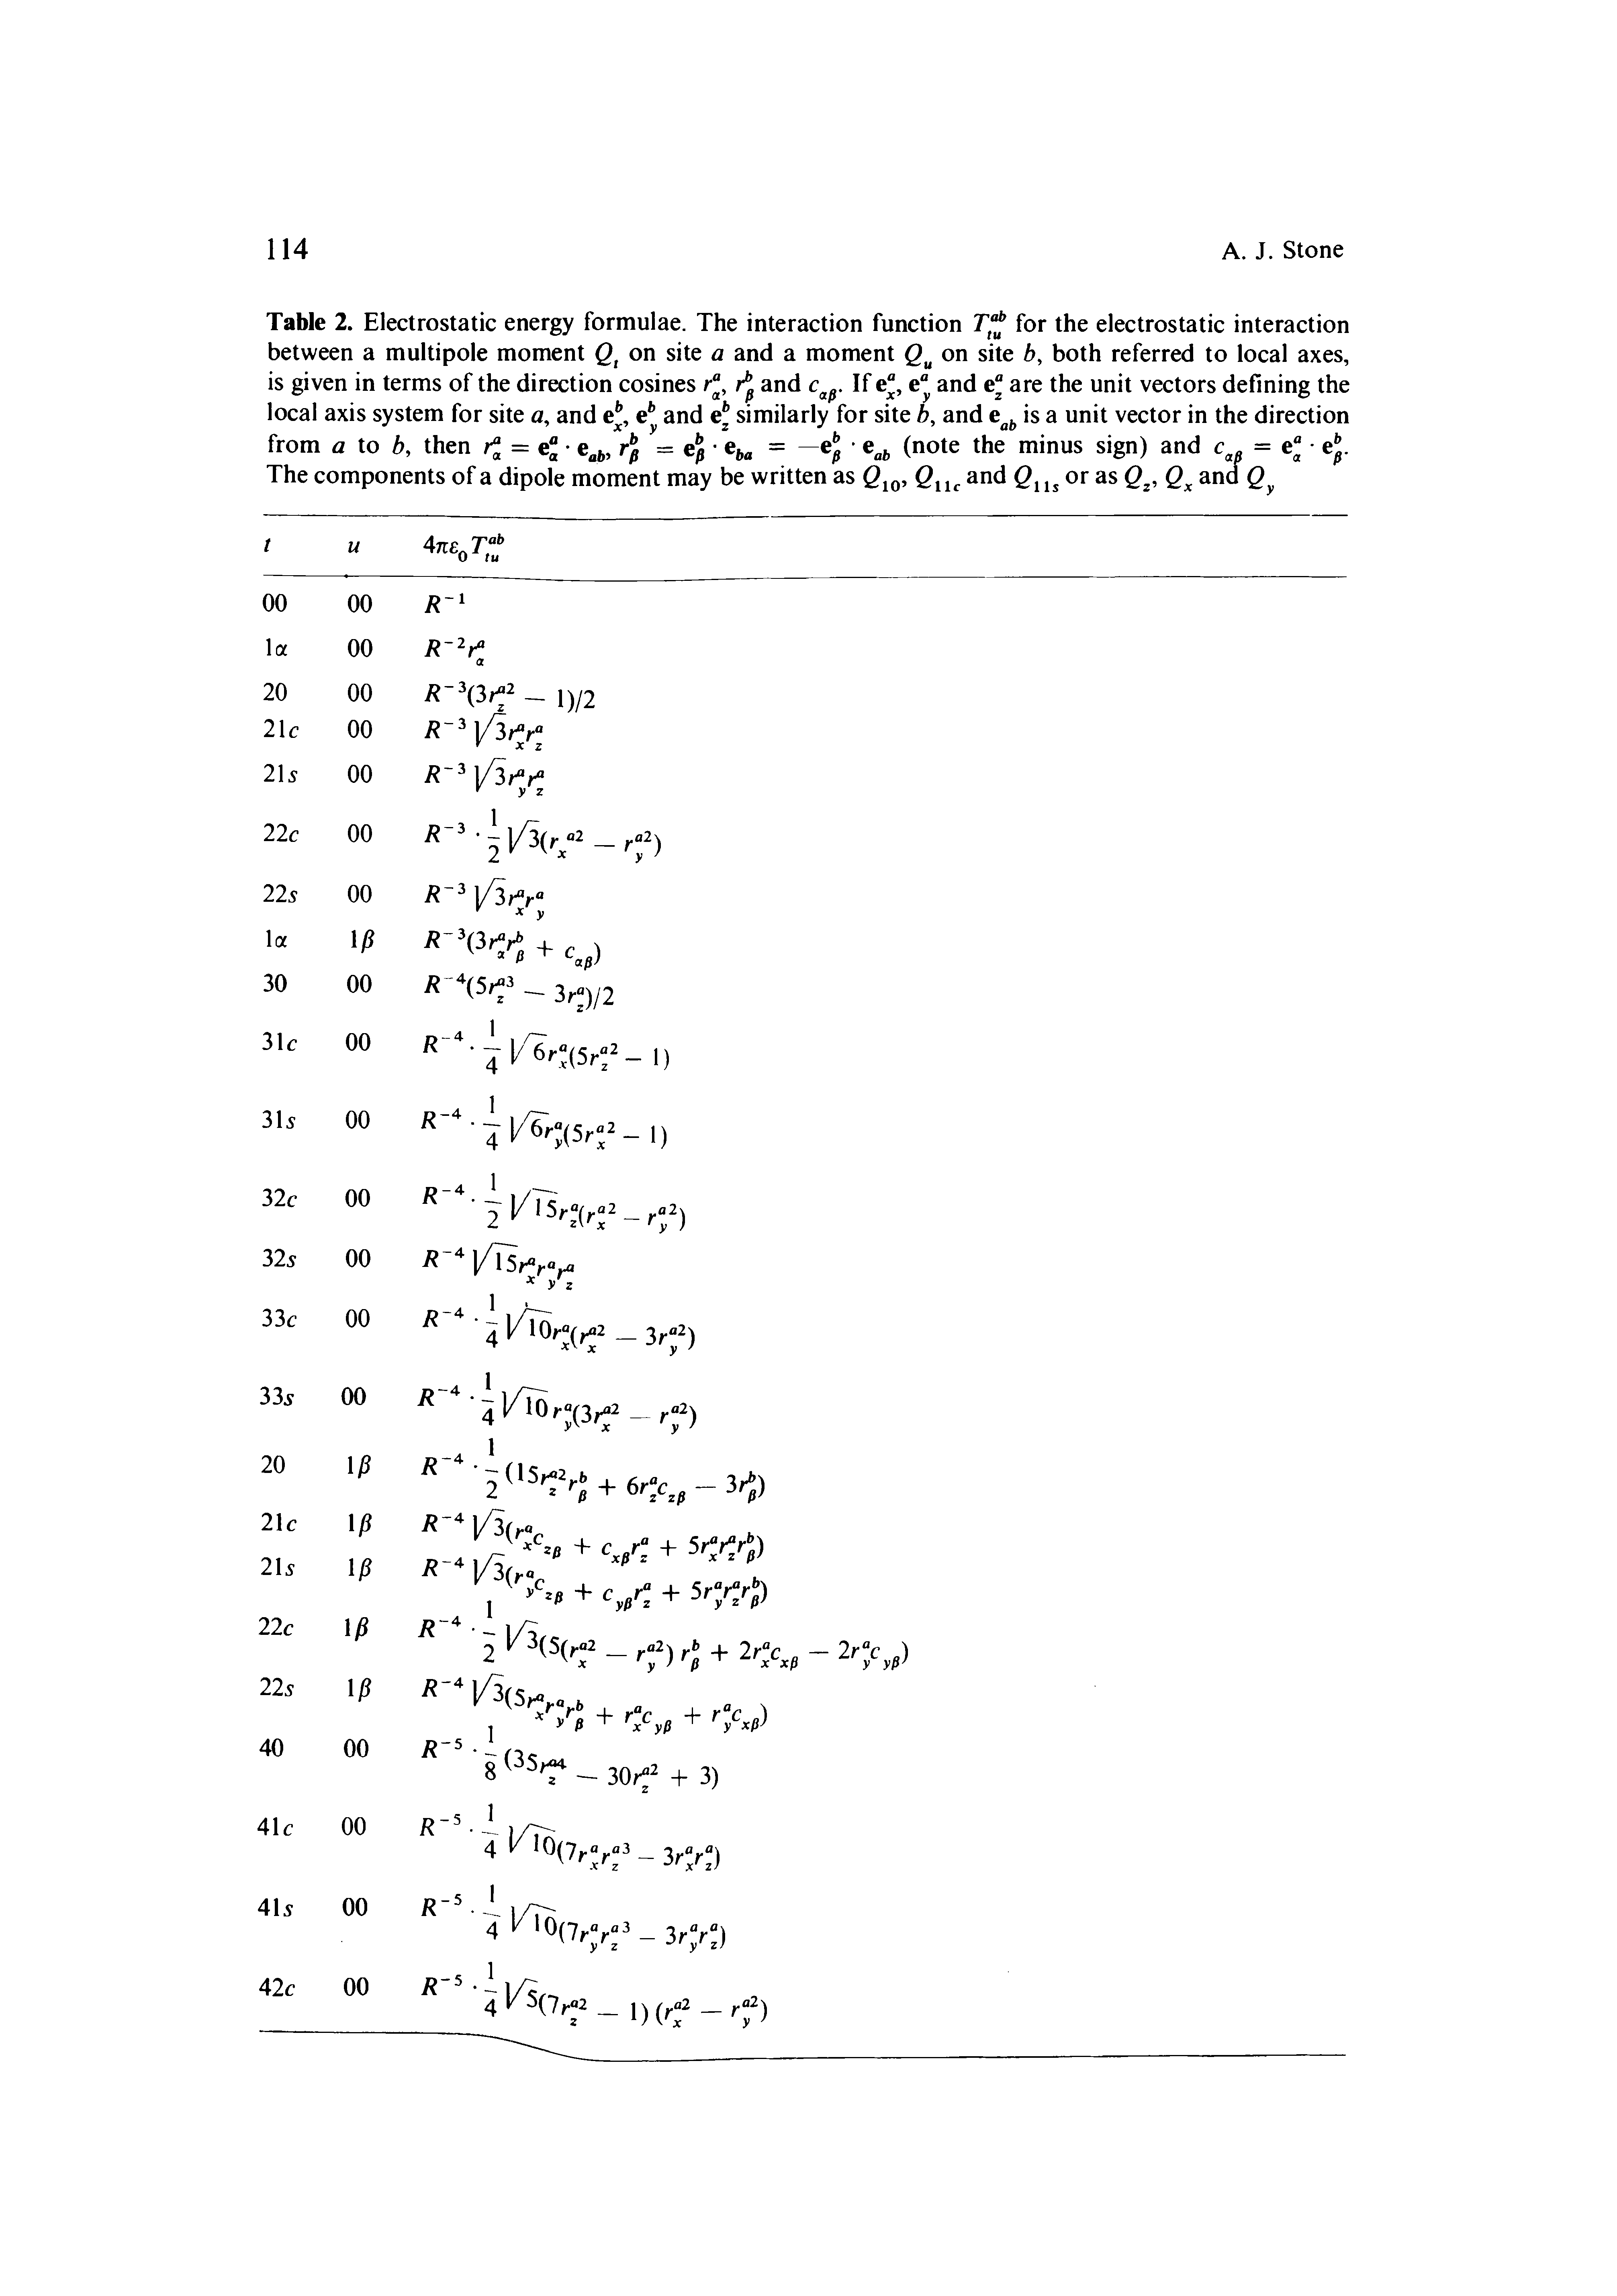 Table 2. Electrostatic energy formulae. The interaction function for the electrostatic interaction between a multipole moment on site a and a moment on site b, both referred to local axes, is given in terms of the direction cosines r , rj and If e , e" and e are the unit vectors defining the local axis system for site a, and e e and e similarly for site b, and is a unit vector in the direction from a to b, then rj = ej e,j, rj = ej e. = -ej (note the minus sign) and c = c ej. The components of a dipole moment may be written as 0 and or as and...